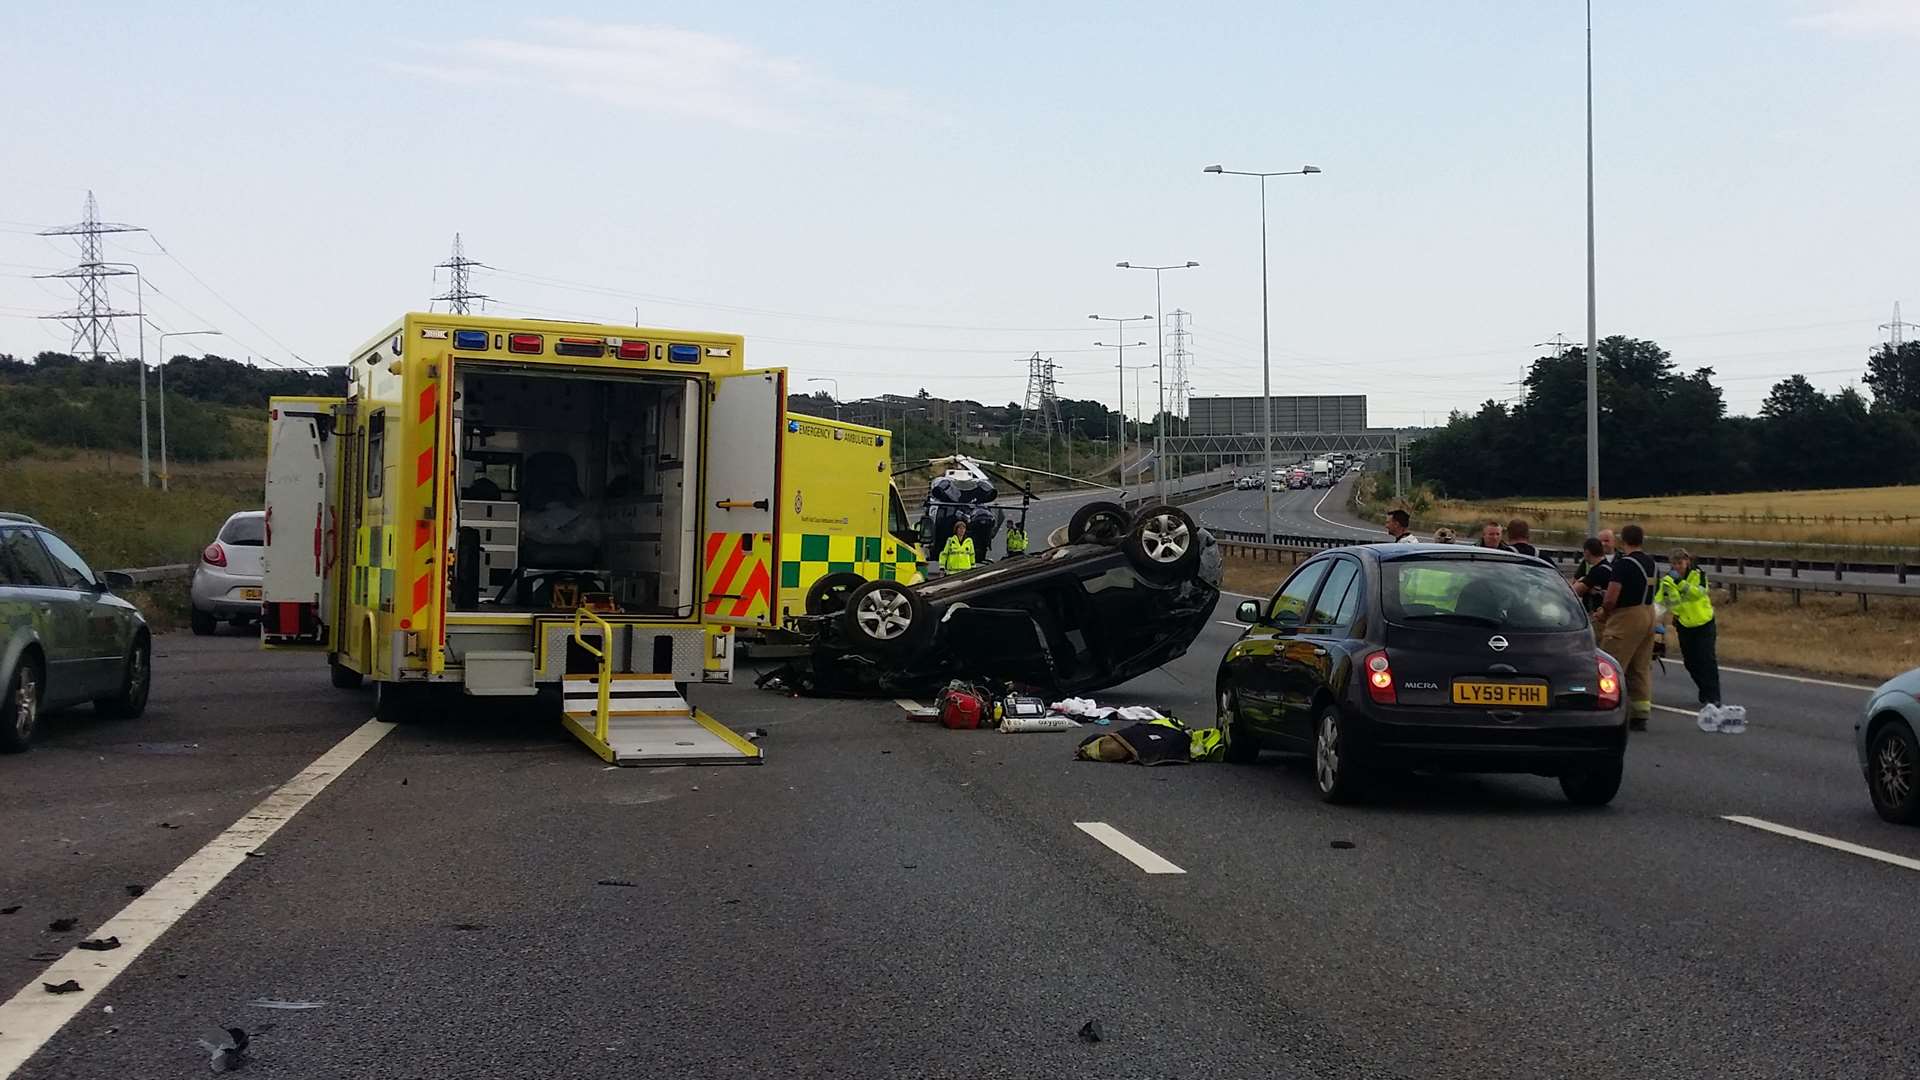 The crash took place on the A2 at Ebbsfleet going coastbound